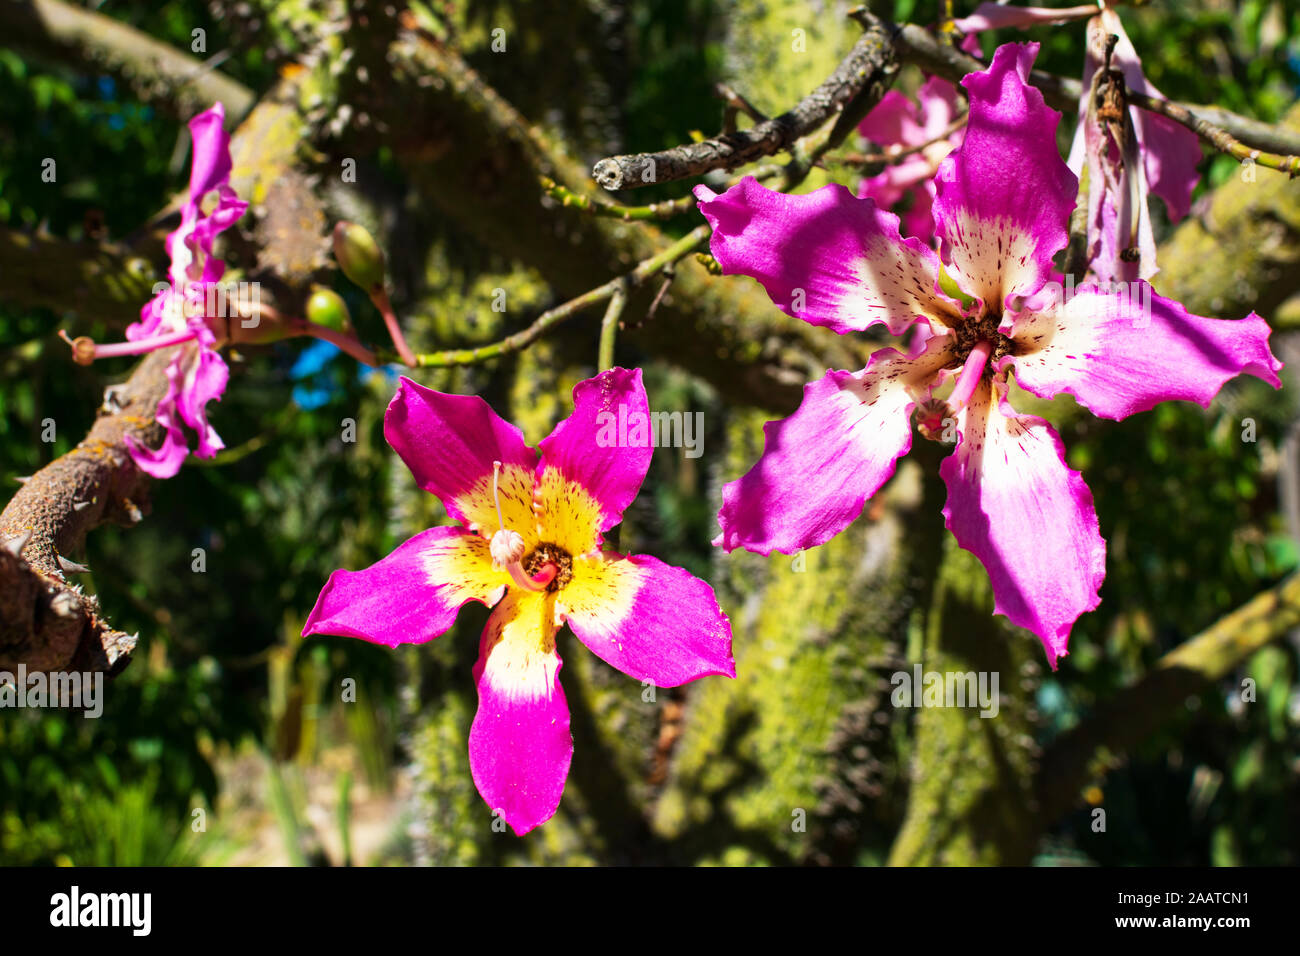 Floss silk tree blooming flowers closeup. Ceiba speciosa tree is native to the tropical and subtropical forests of South America. Stock Photo